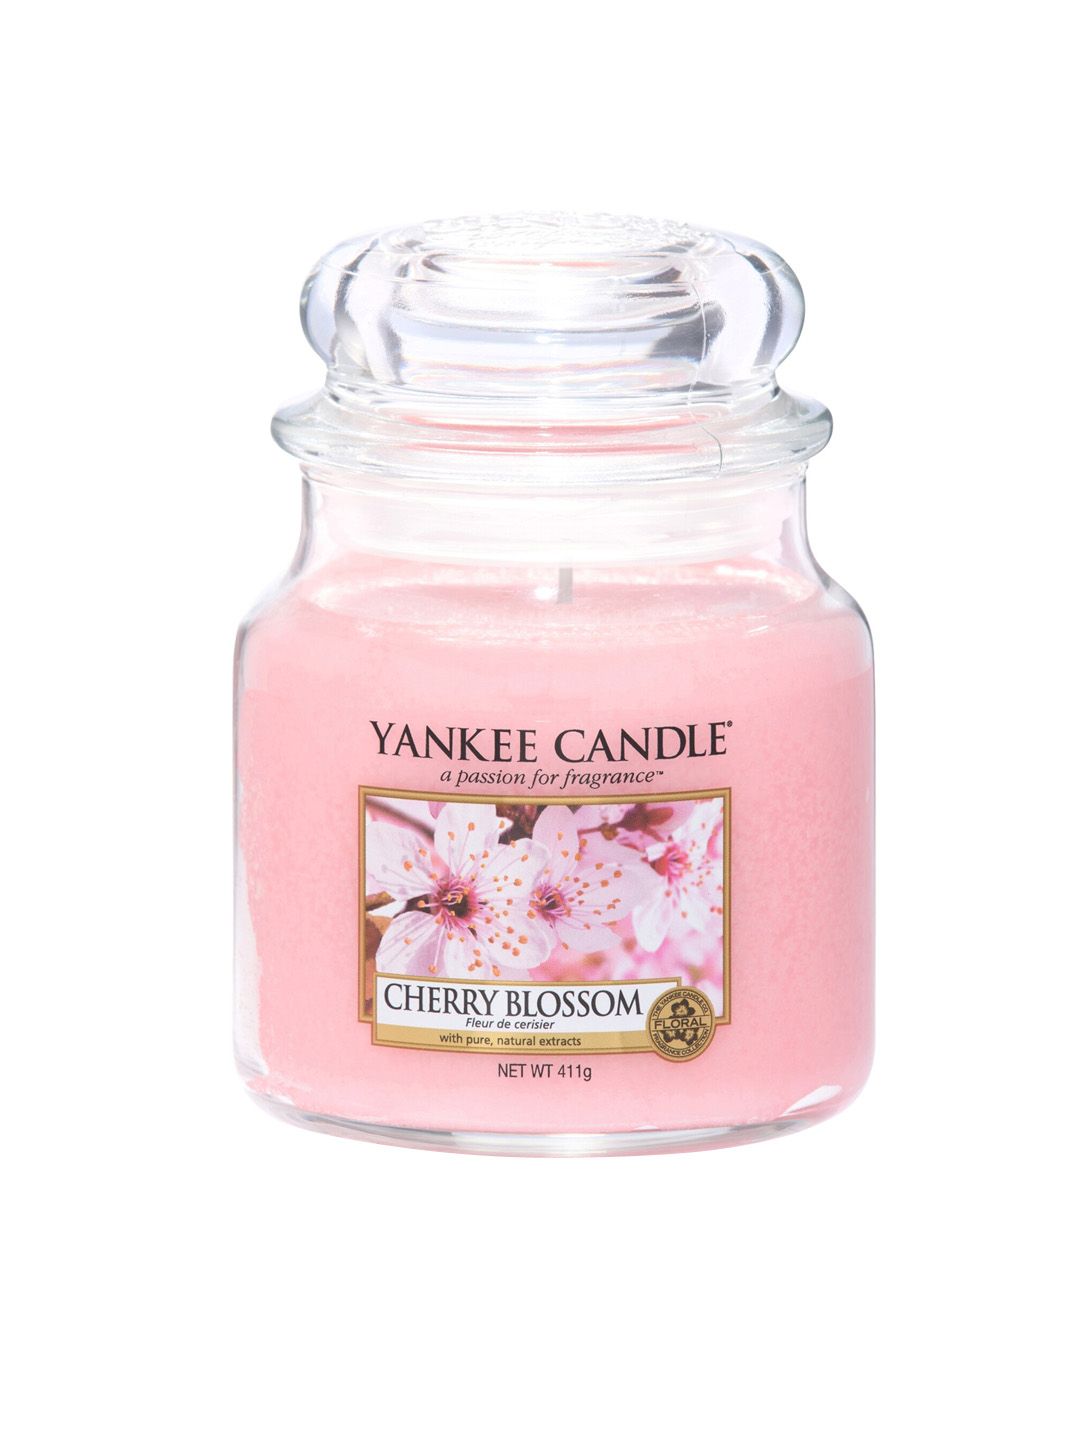 YANKEE CANDLE Pink Classic Medium Jar Cherry Blossom Scented Candles Price in India